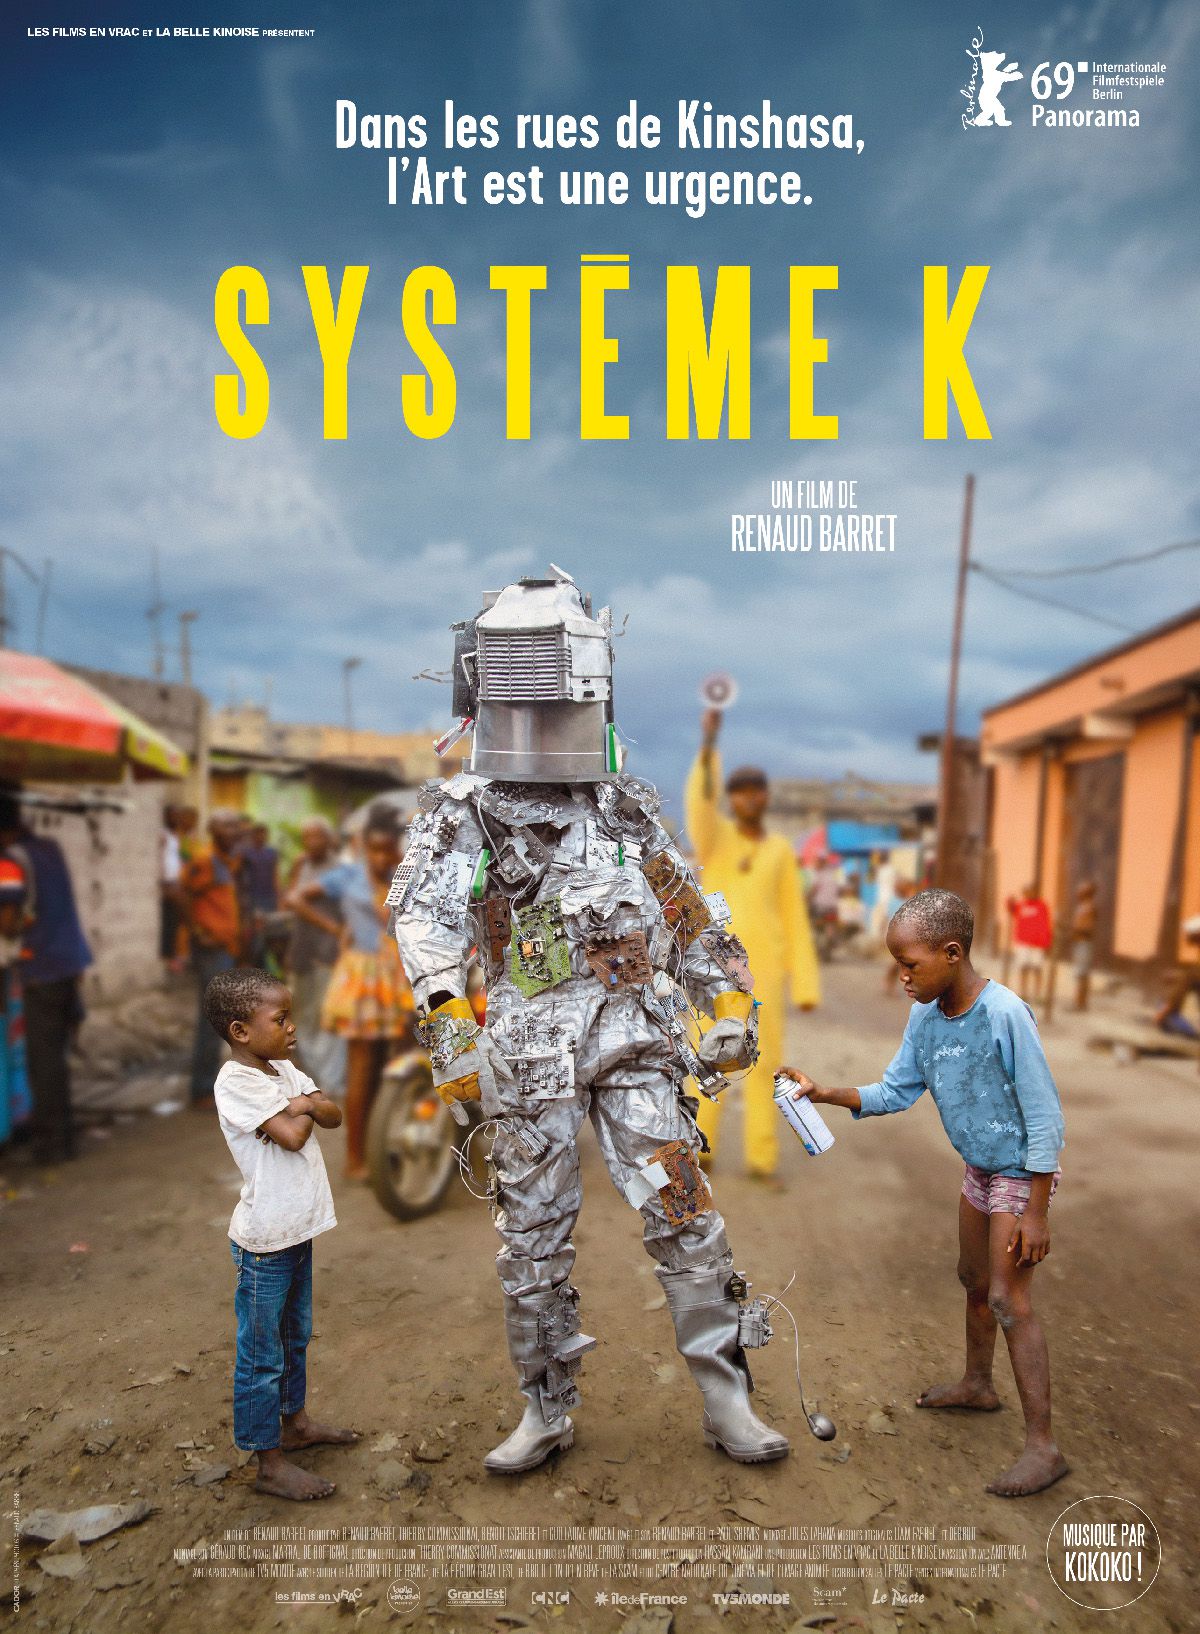 Système K - Documentaire (2020) streaming VF gratuit complet